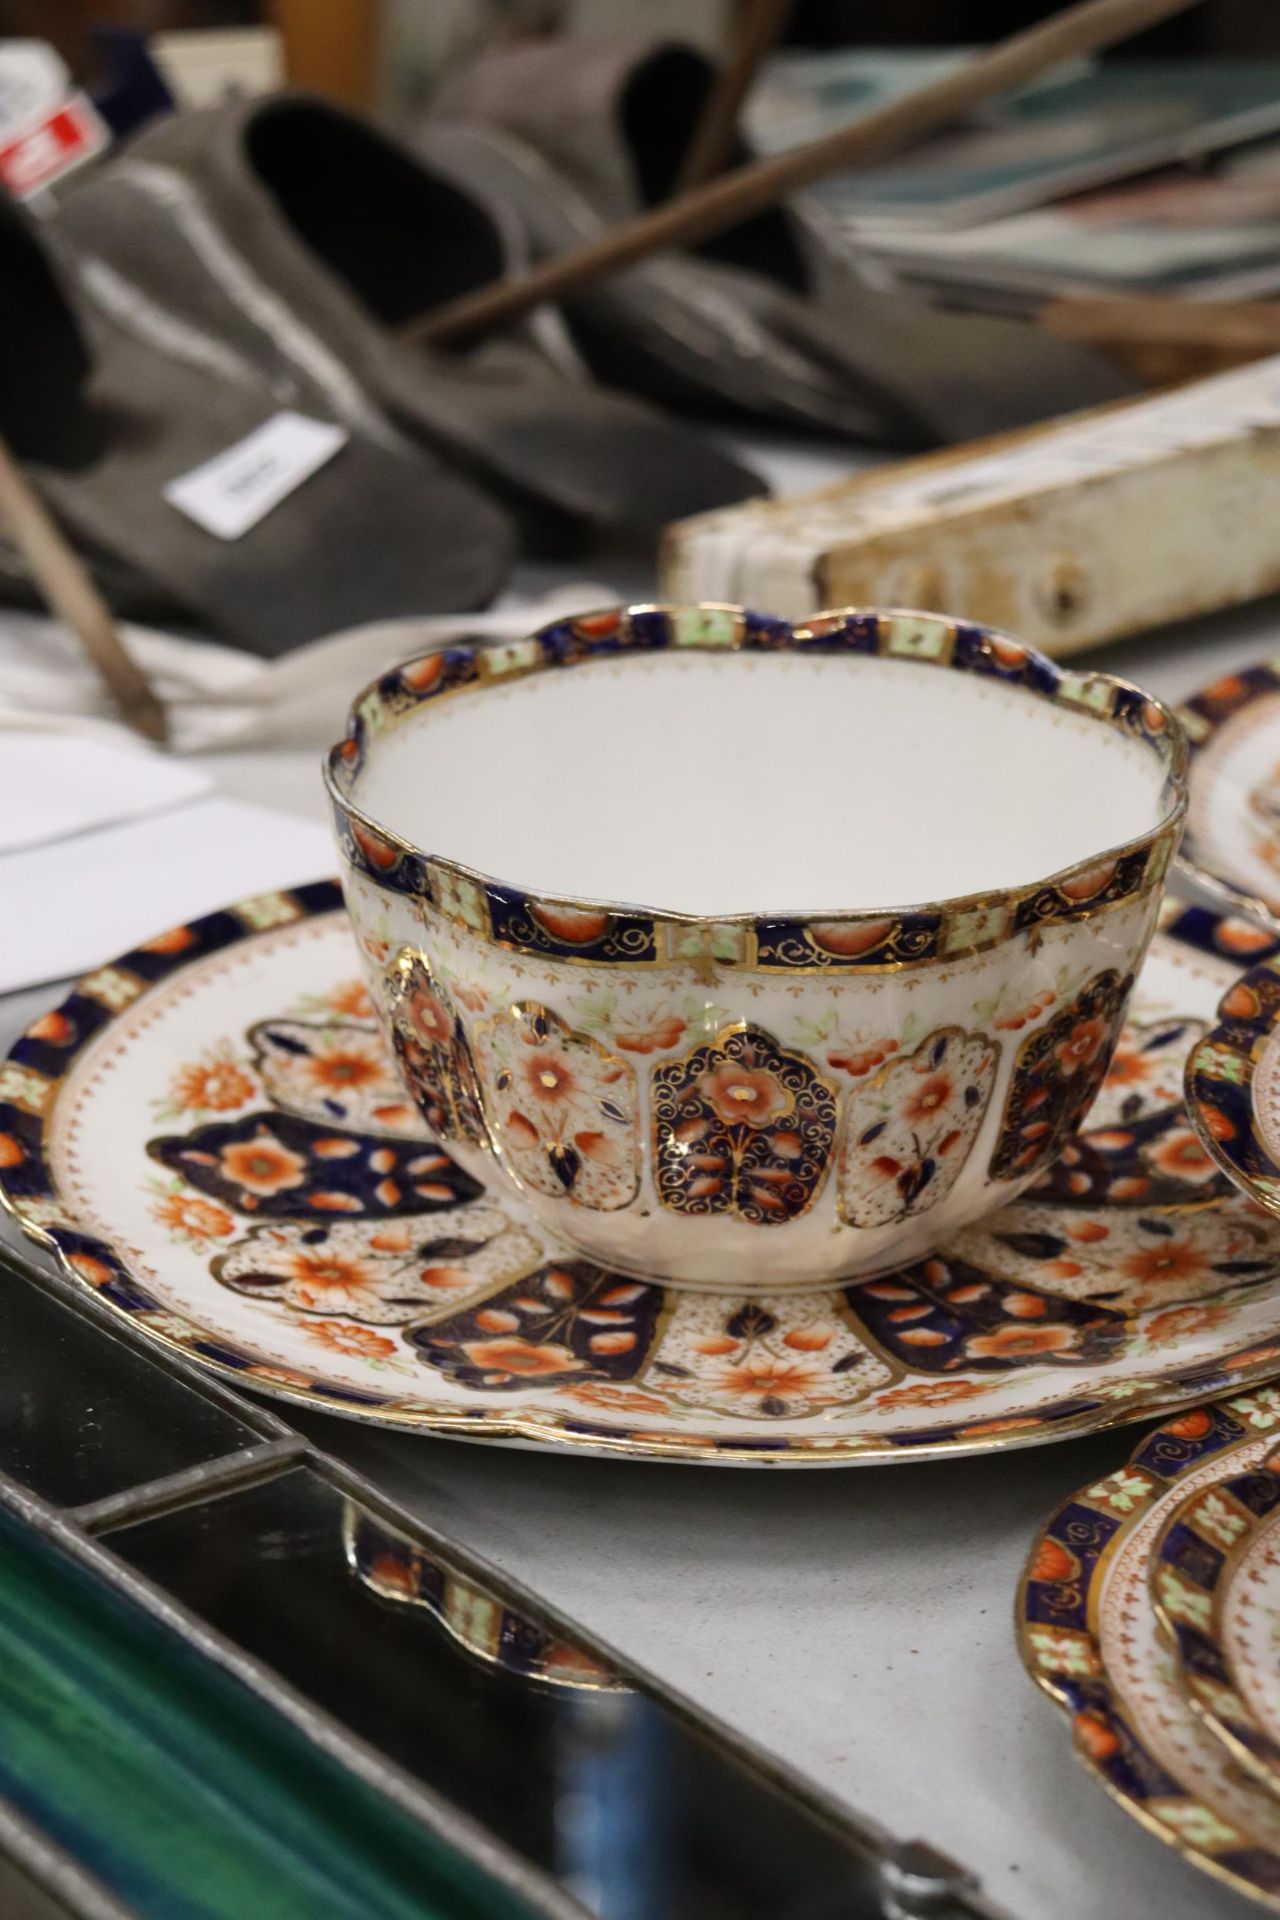 AN ANTIQUE 'COURT CHINA' TEASET TO INCLUDE CAKE PLATES, CUPS, SAUCERS, SIDE PLATES AND A SUGAR BOWL - Image 5 of 9